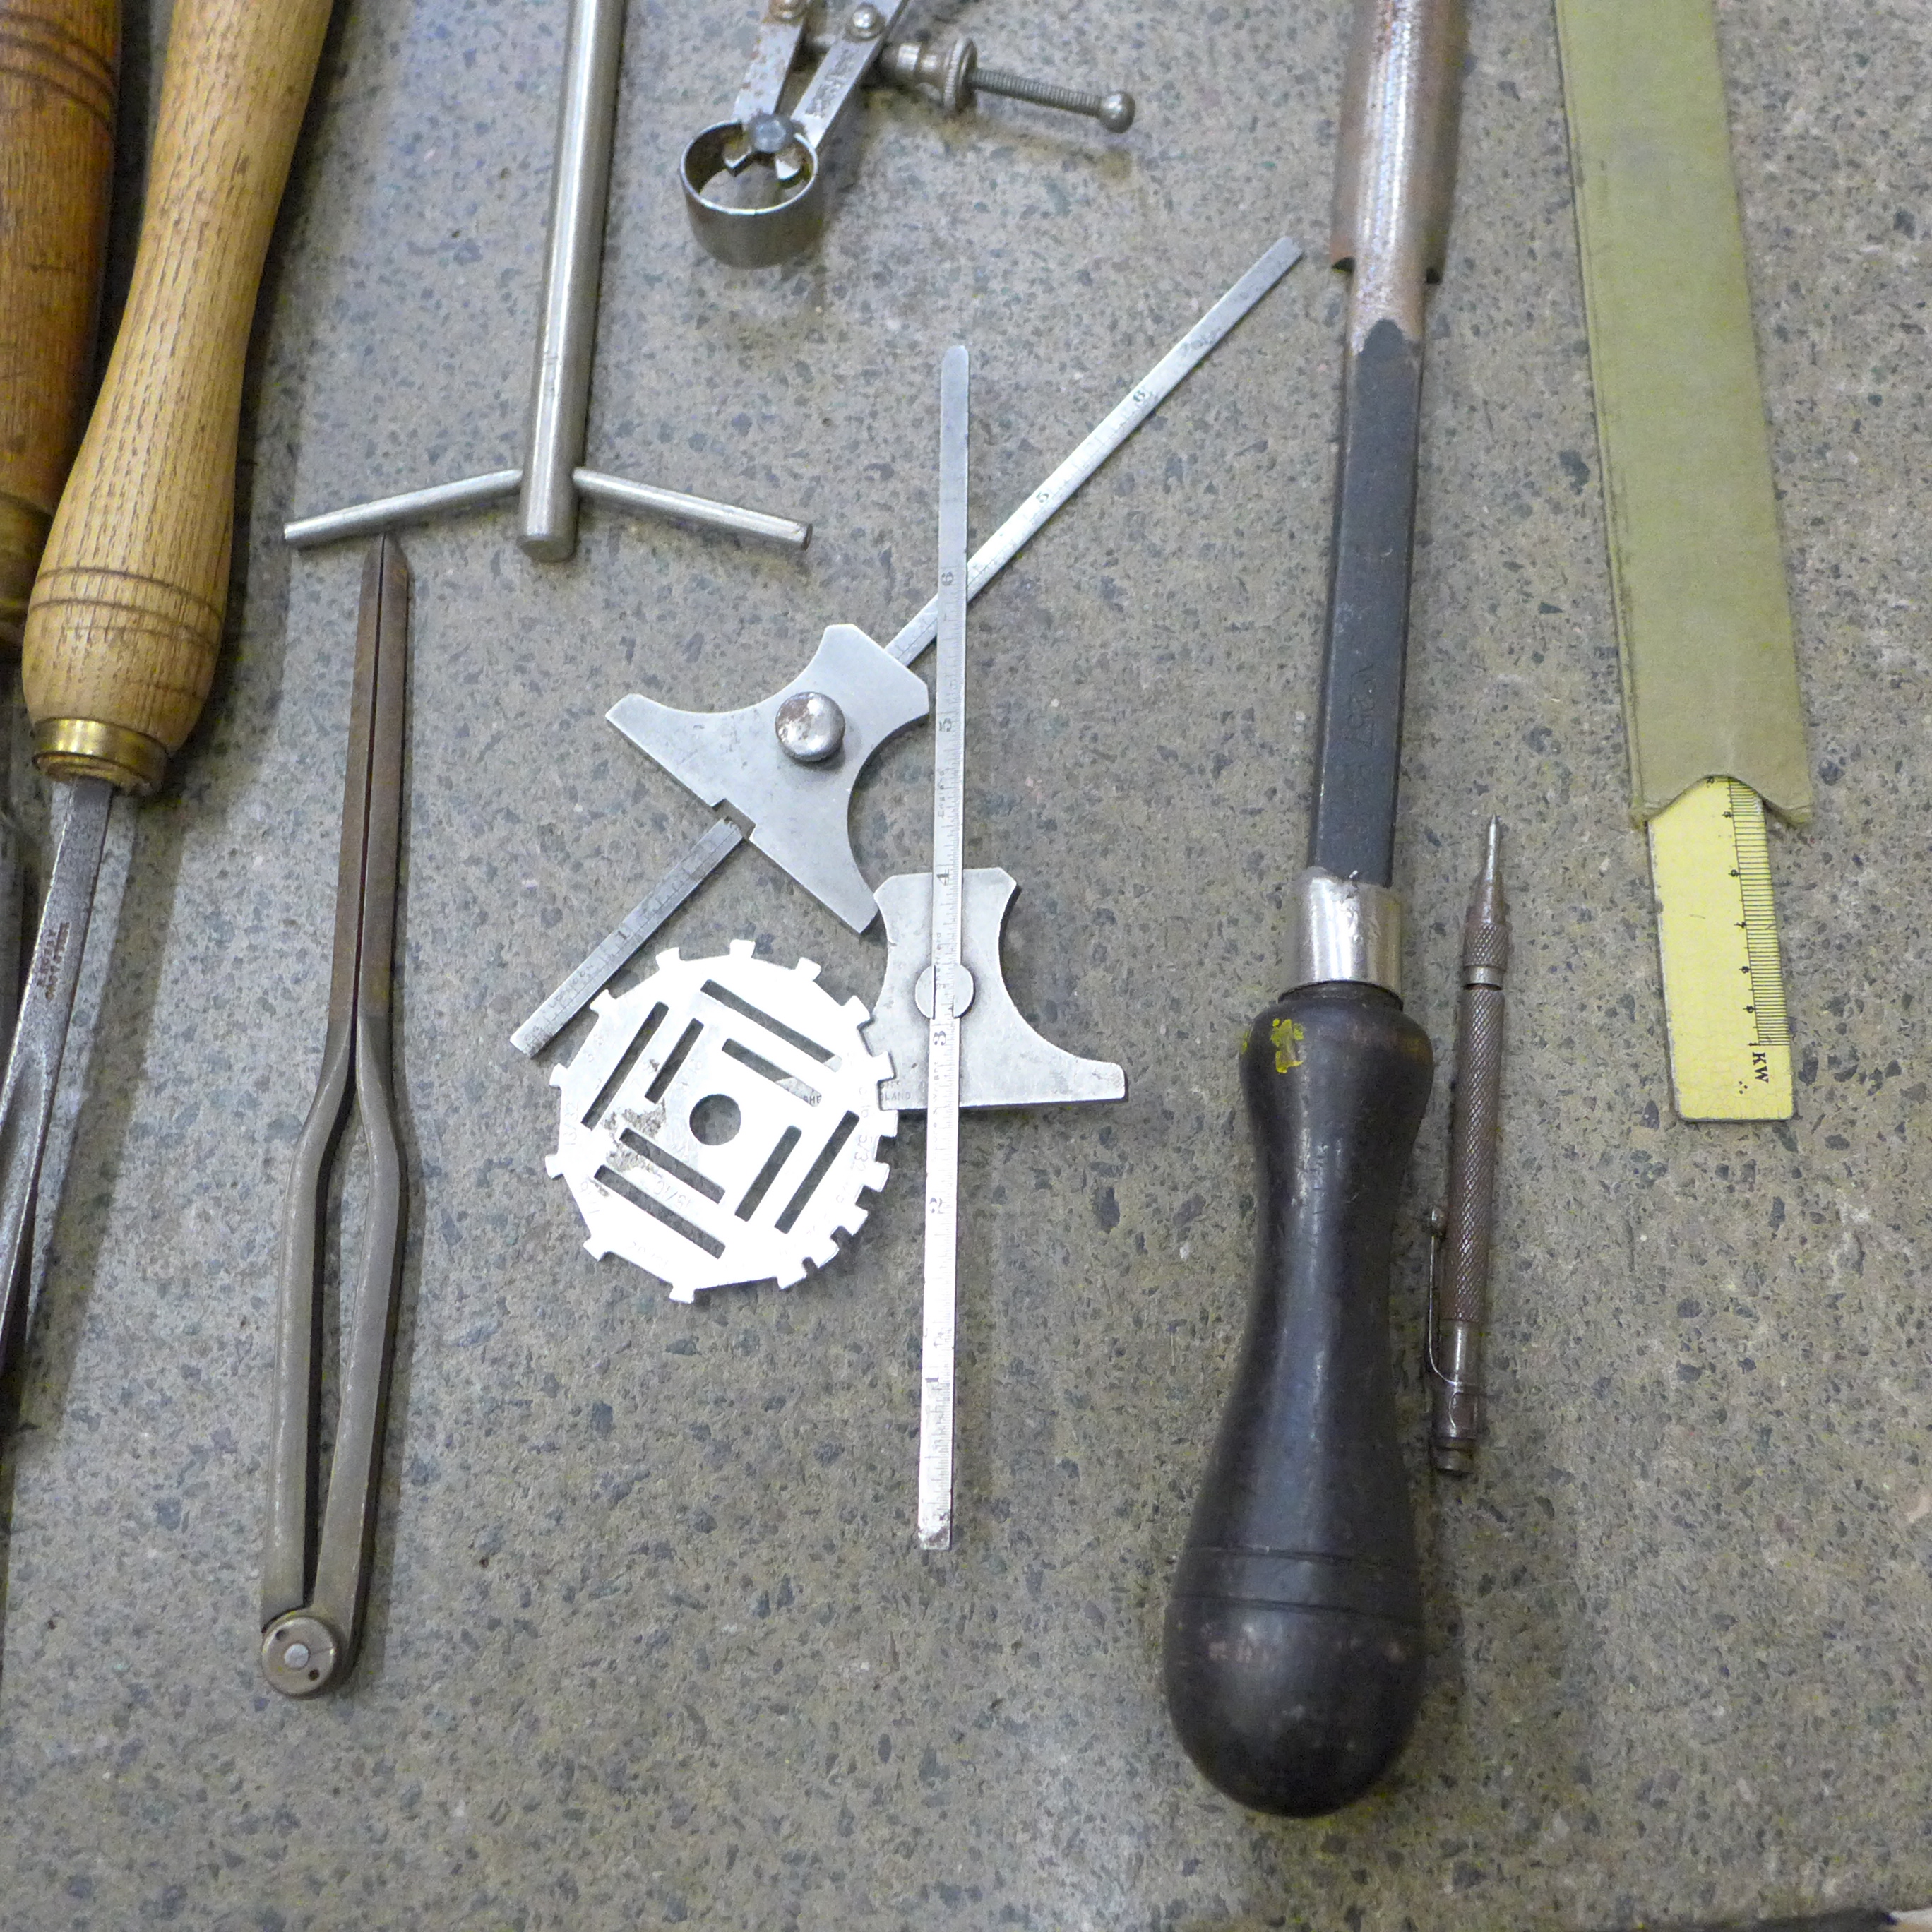 Five carving chisels and engineering items including depth gauges and calipers - Image 2 of 6